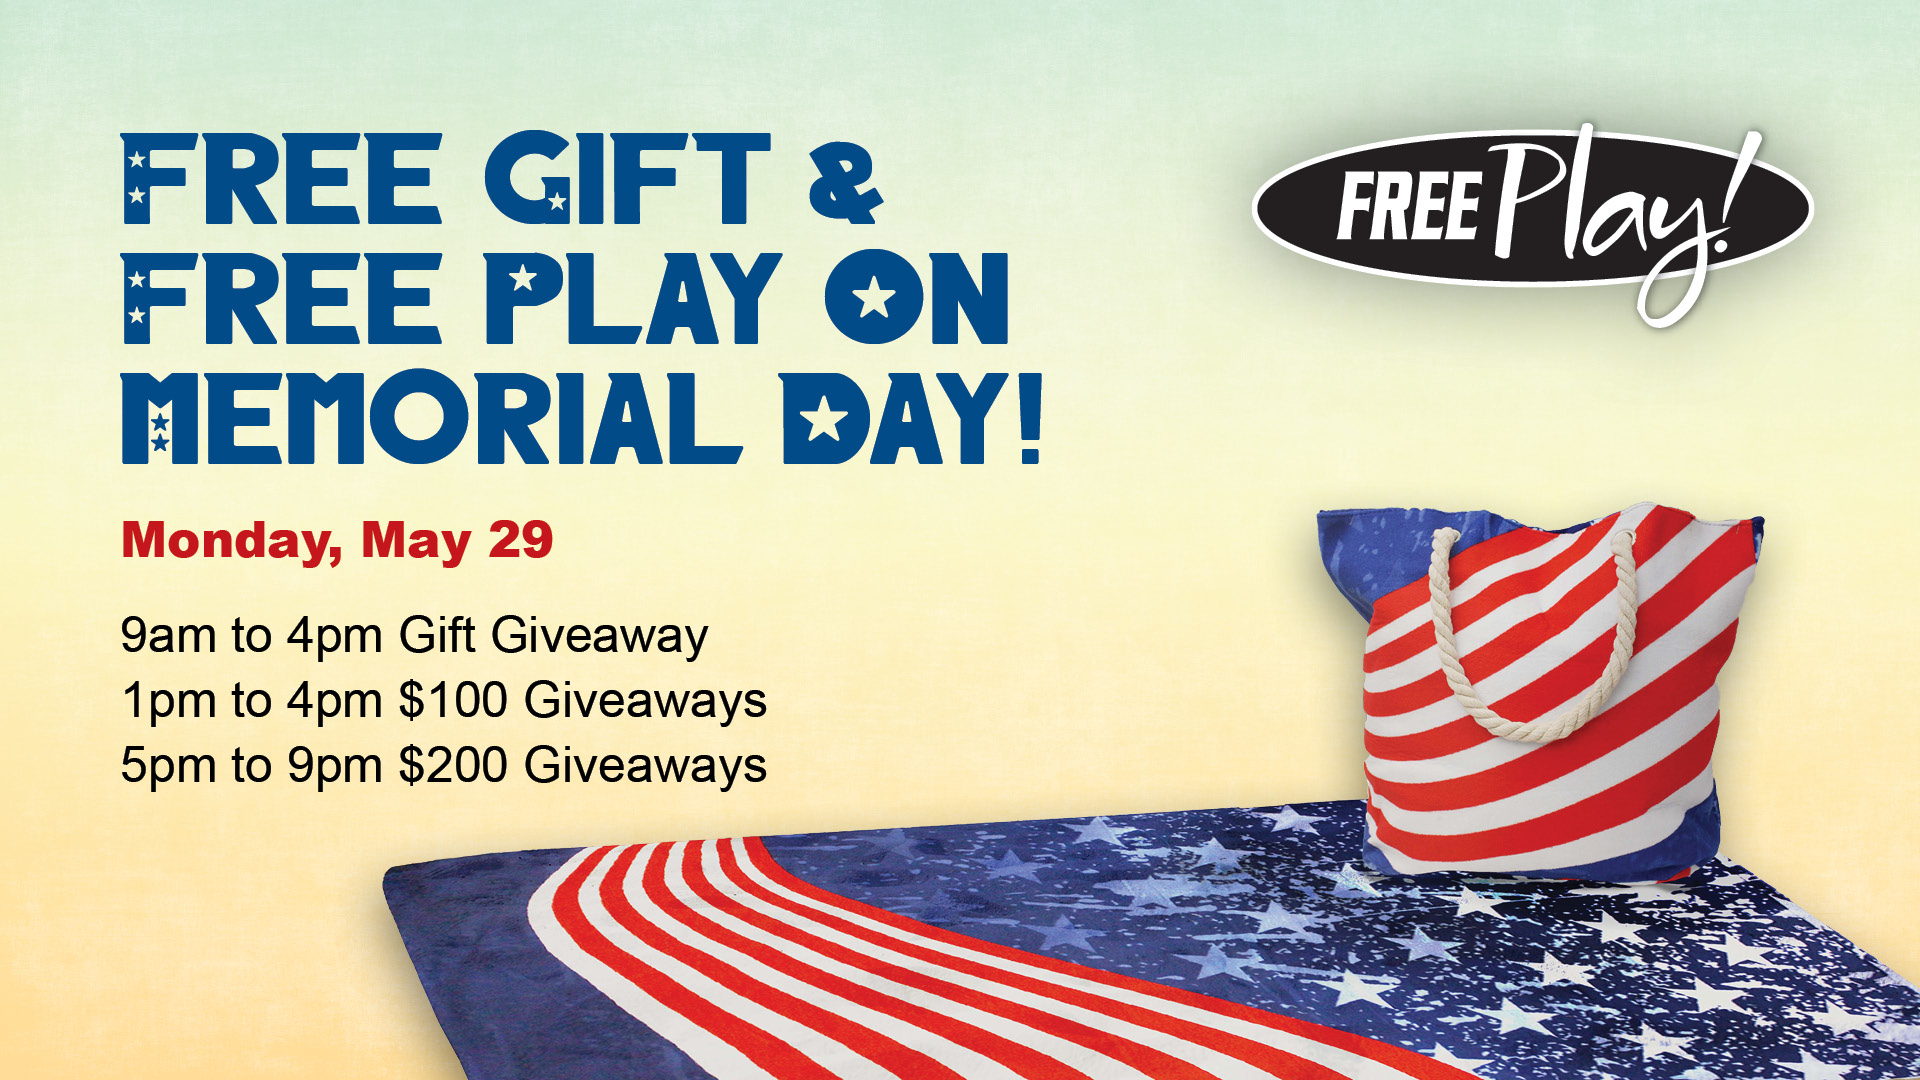 Free Play! Free gift & free play on Memorial Day! Monday, May 29. 9am to 4pm Gift Giveaway. 1pm to 4pm $100 Giveaways. 5pm to 9pm $200 Giveaways.